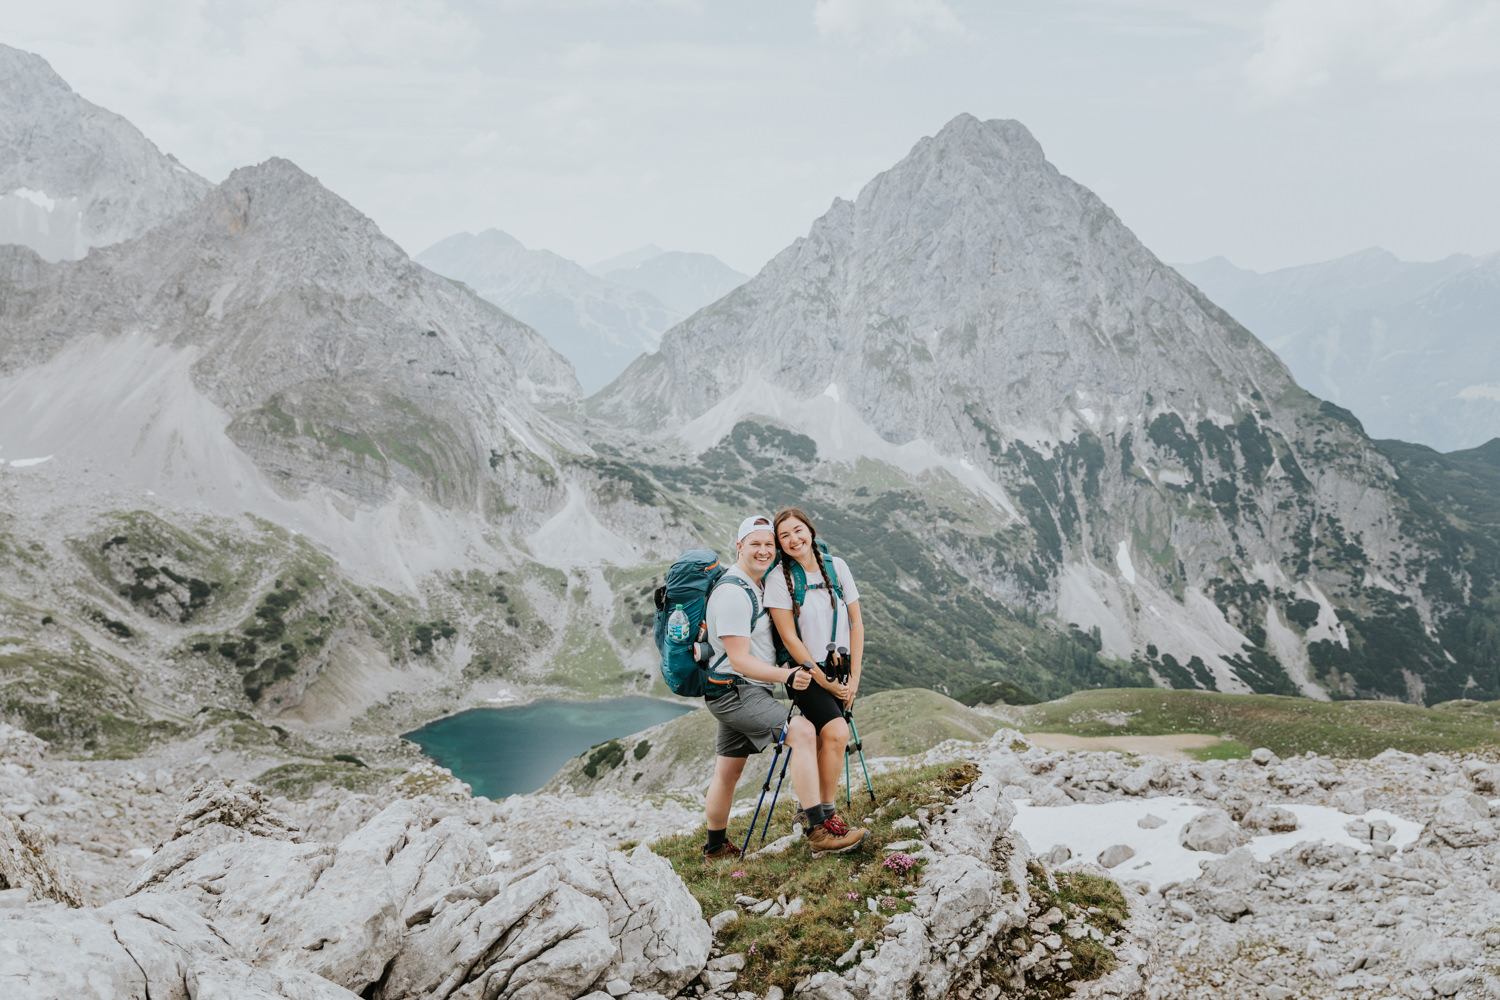 A couple hiking on their elopement day pose smiling under the Austrian Zugspitze, framed by tall rocky mountains